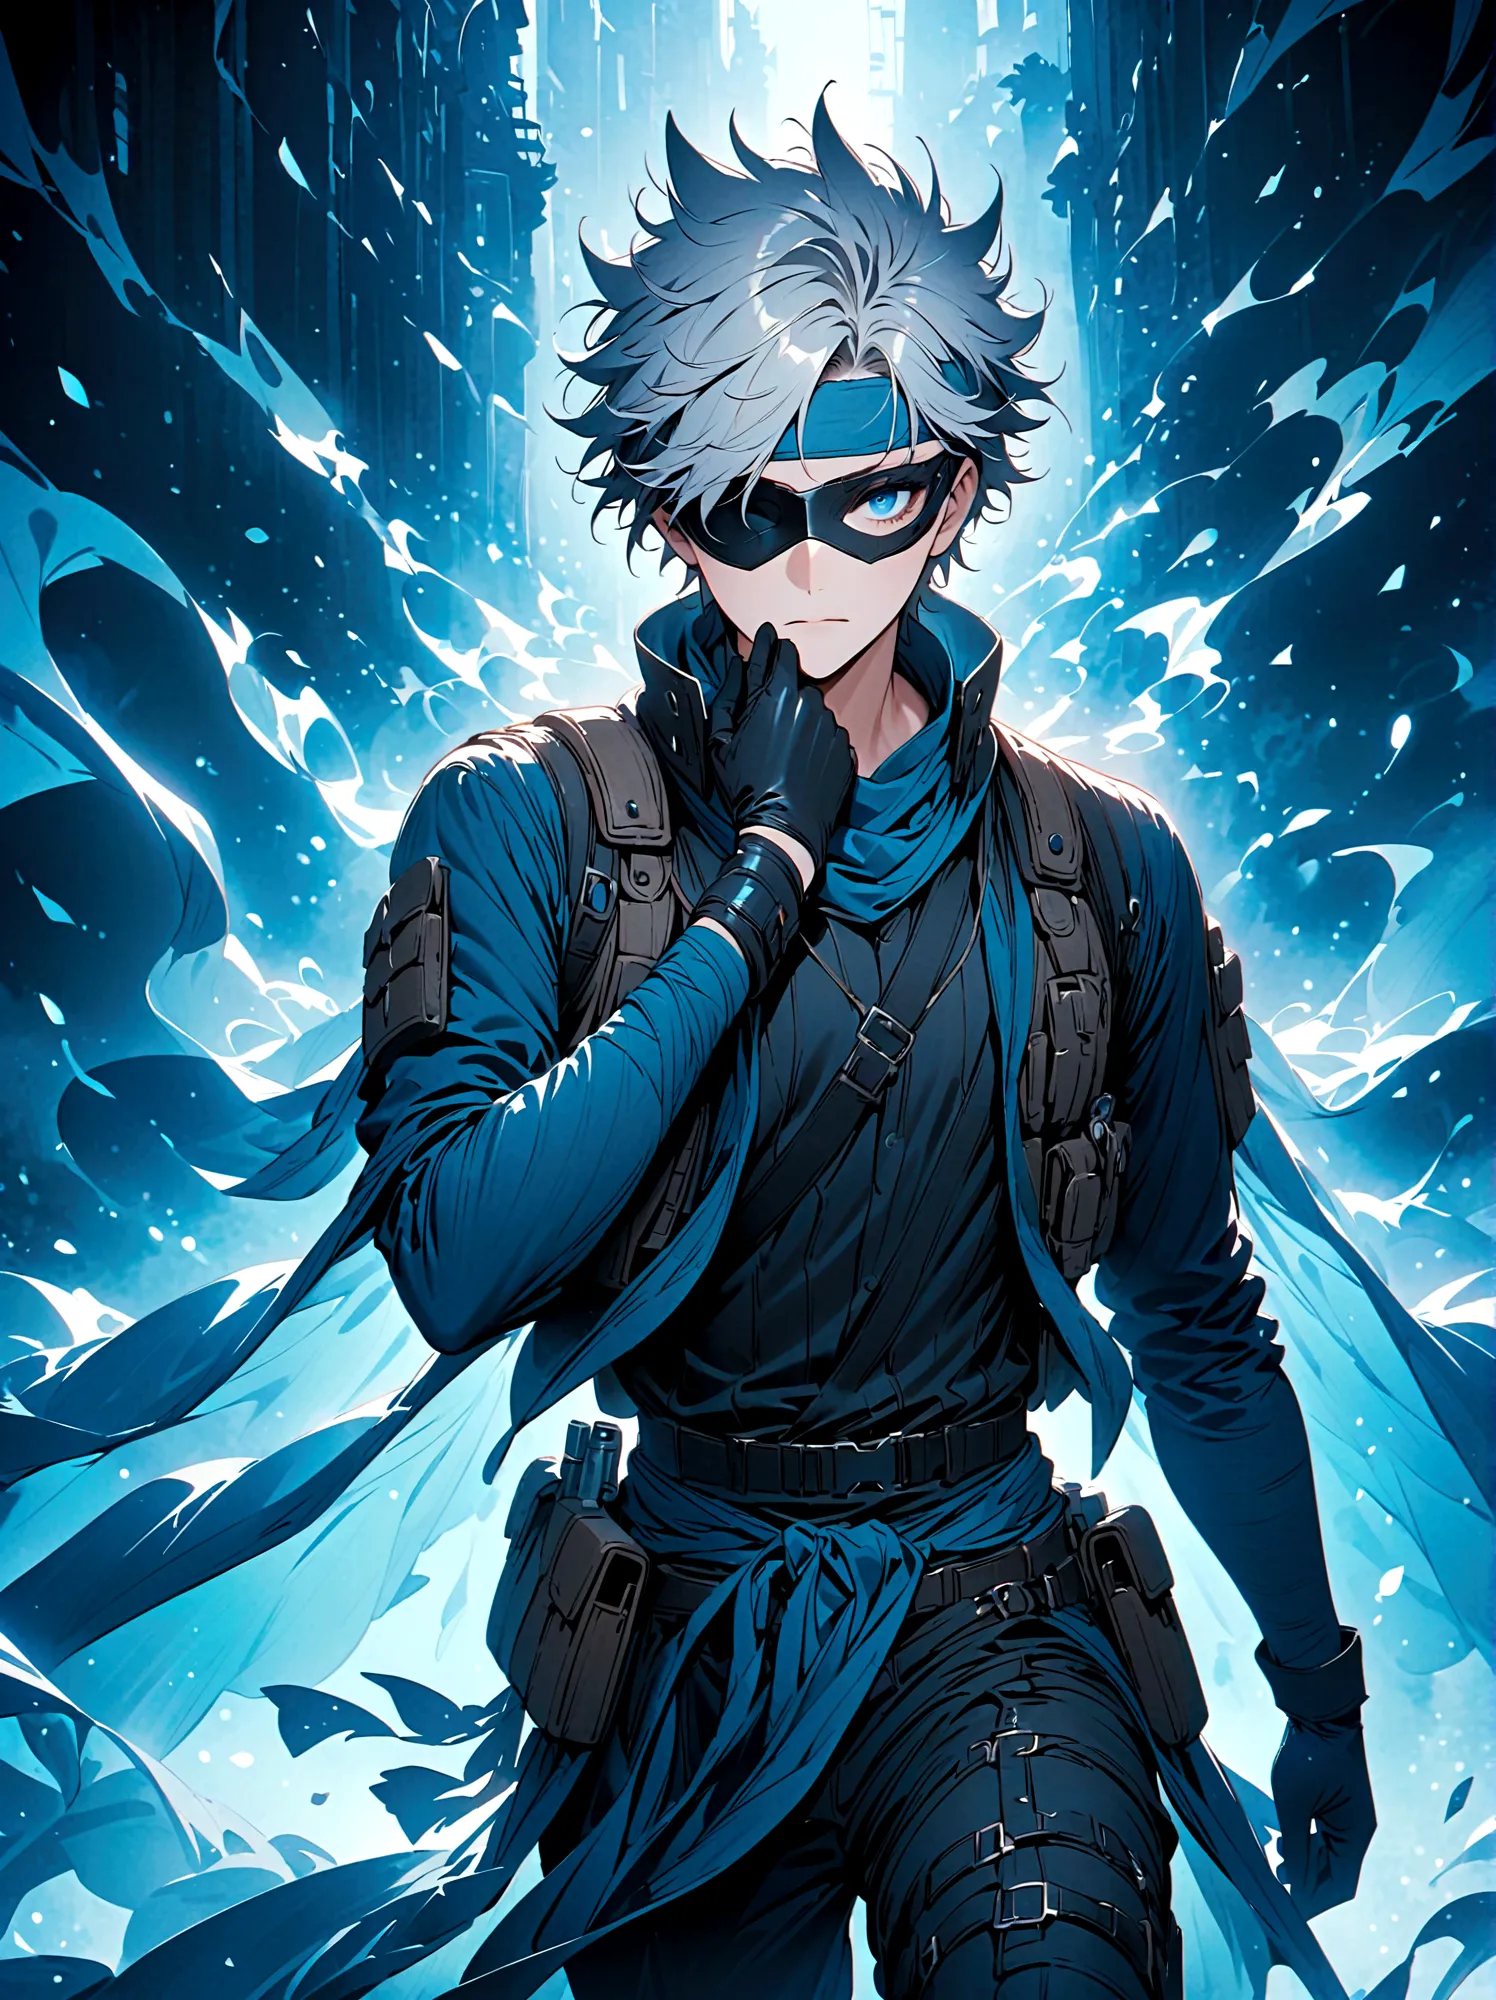 A fictional anime character sporting a silver spiky hair, wearing a headband tilted to cover one eye. He is dressed in a typical...